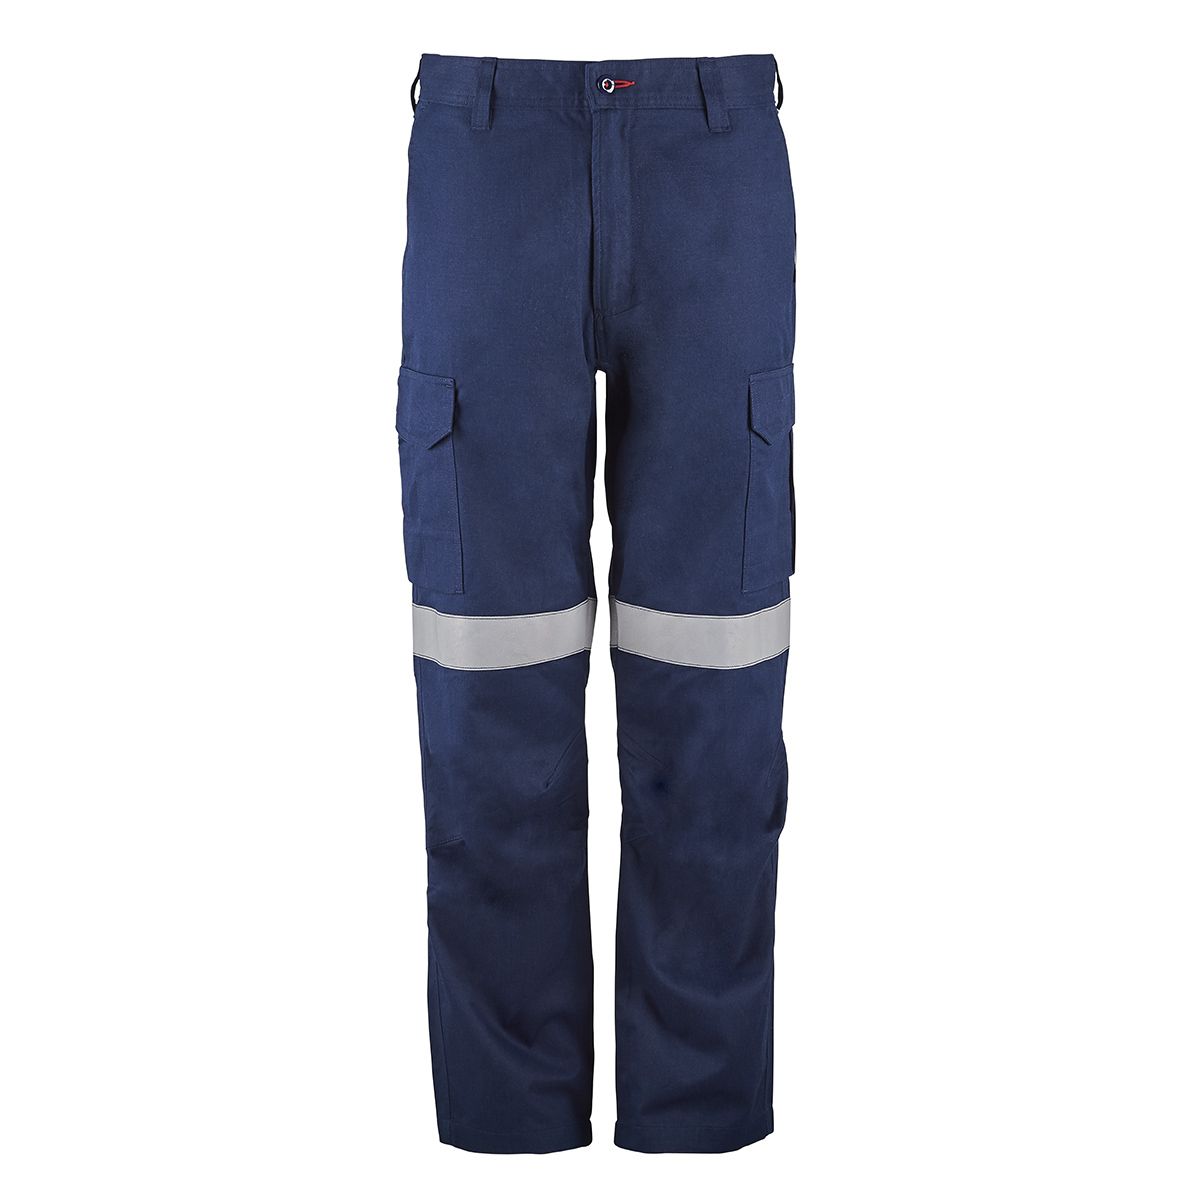 FlameBuster Torrent Fr Navy Taped Cargo Pants atpv 11.5/HRC2 240g 77R